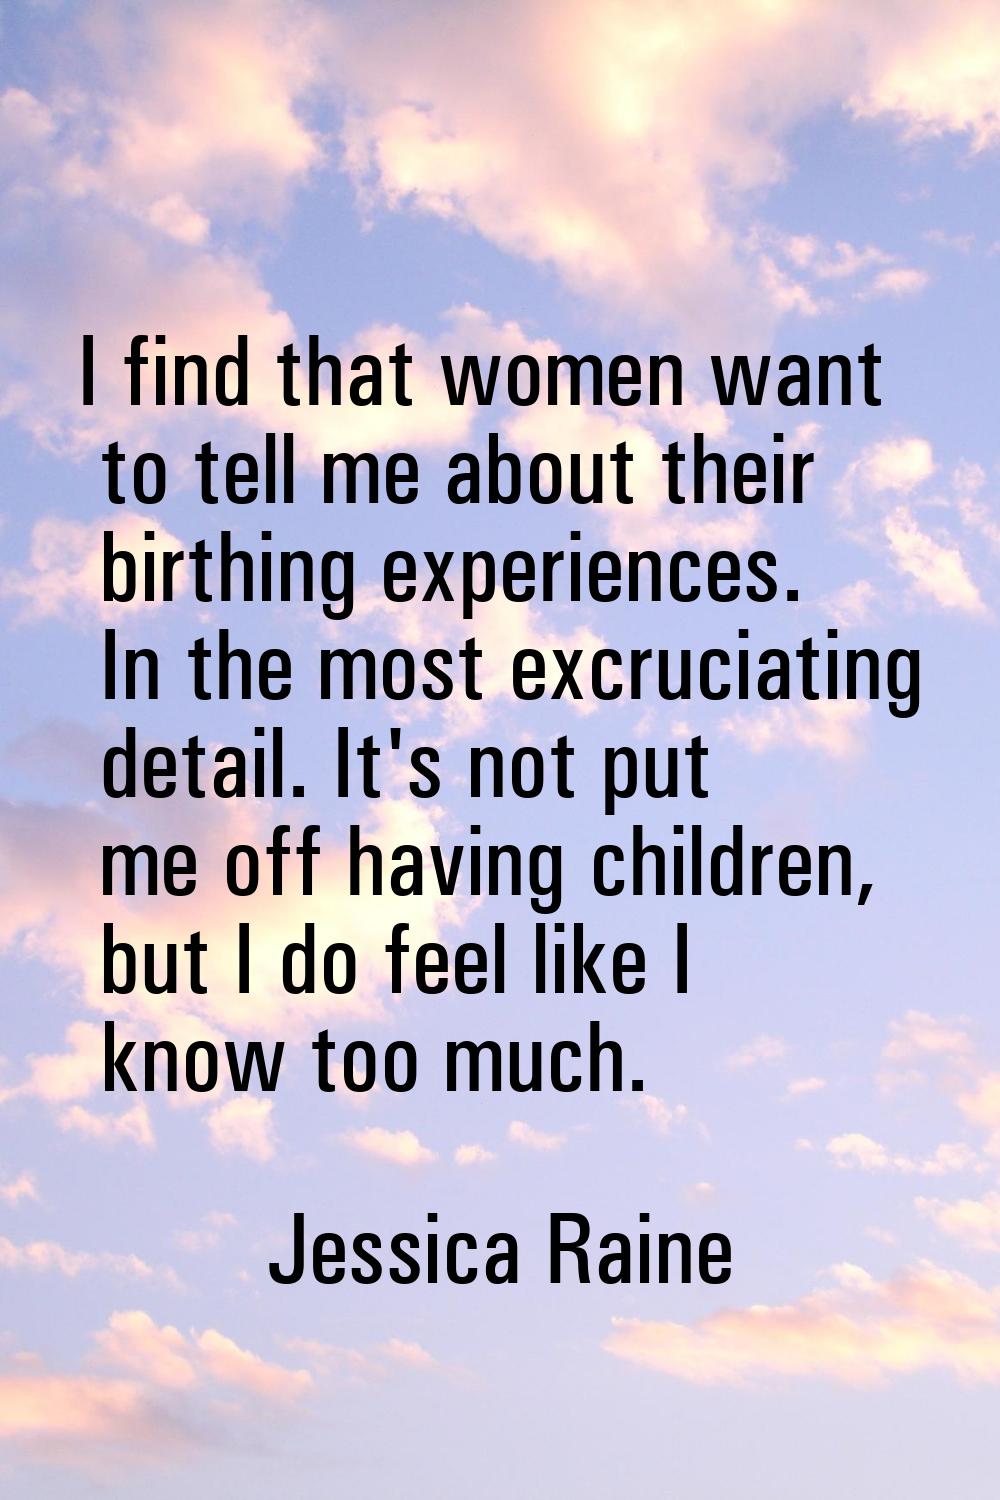 I find that women want to tell me about their birthing experiences. In the most excruciating detail